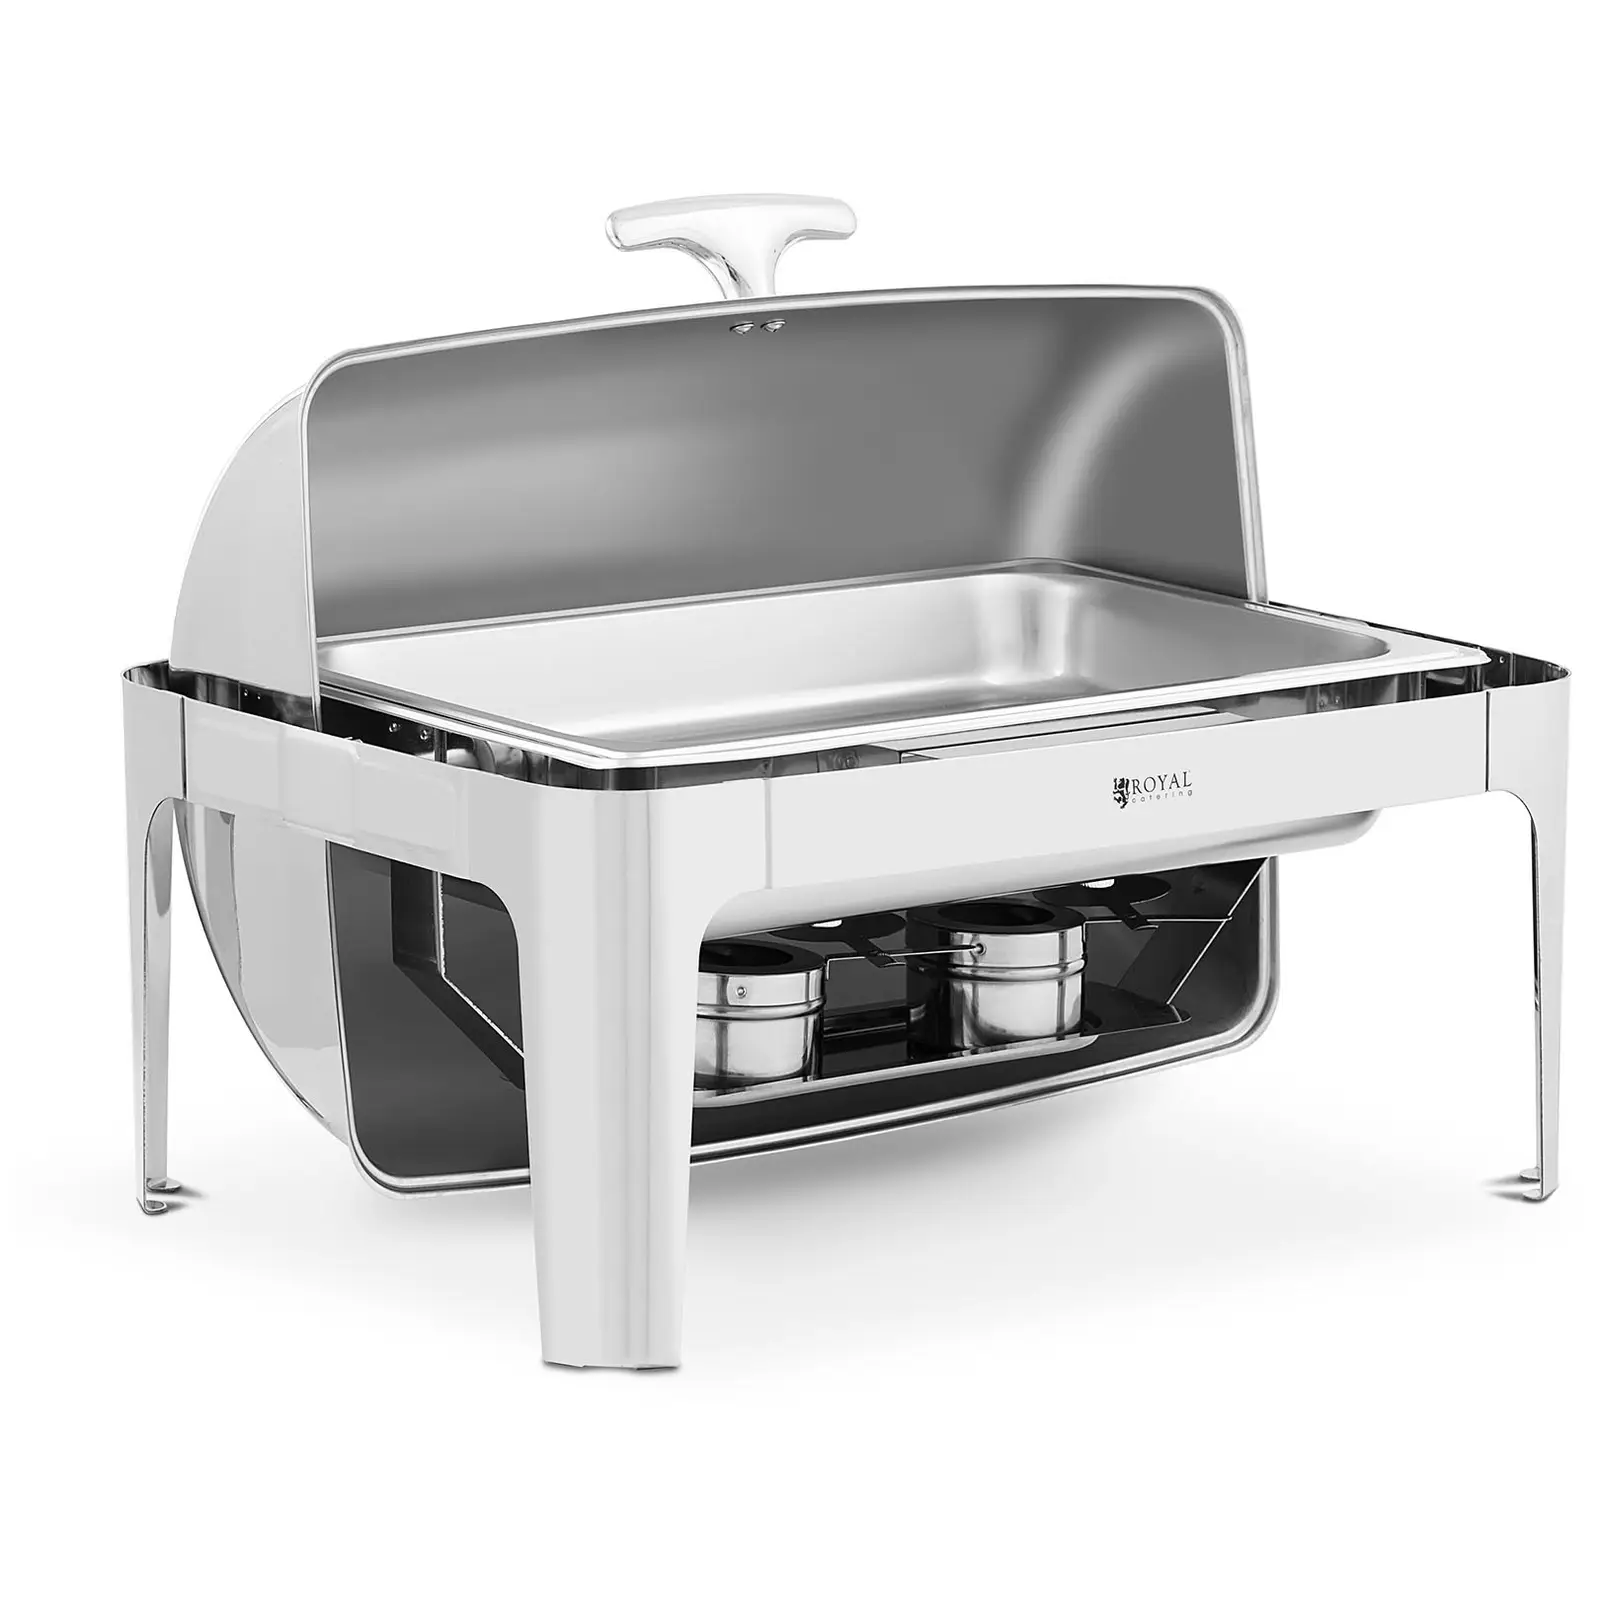 Chafing dish - GN 1/1 - Royal Catering - 8.5 L - 2 Brandstofcellen - roltop